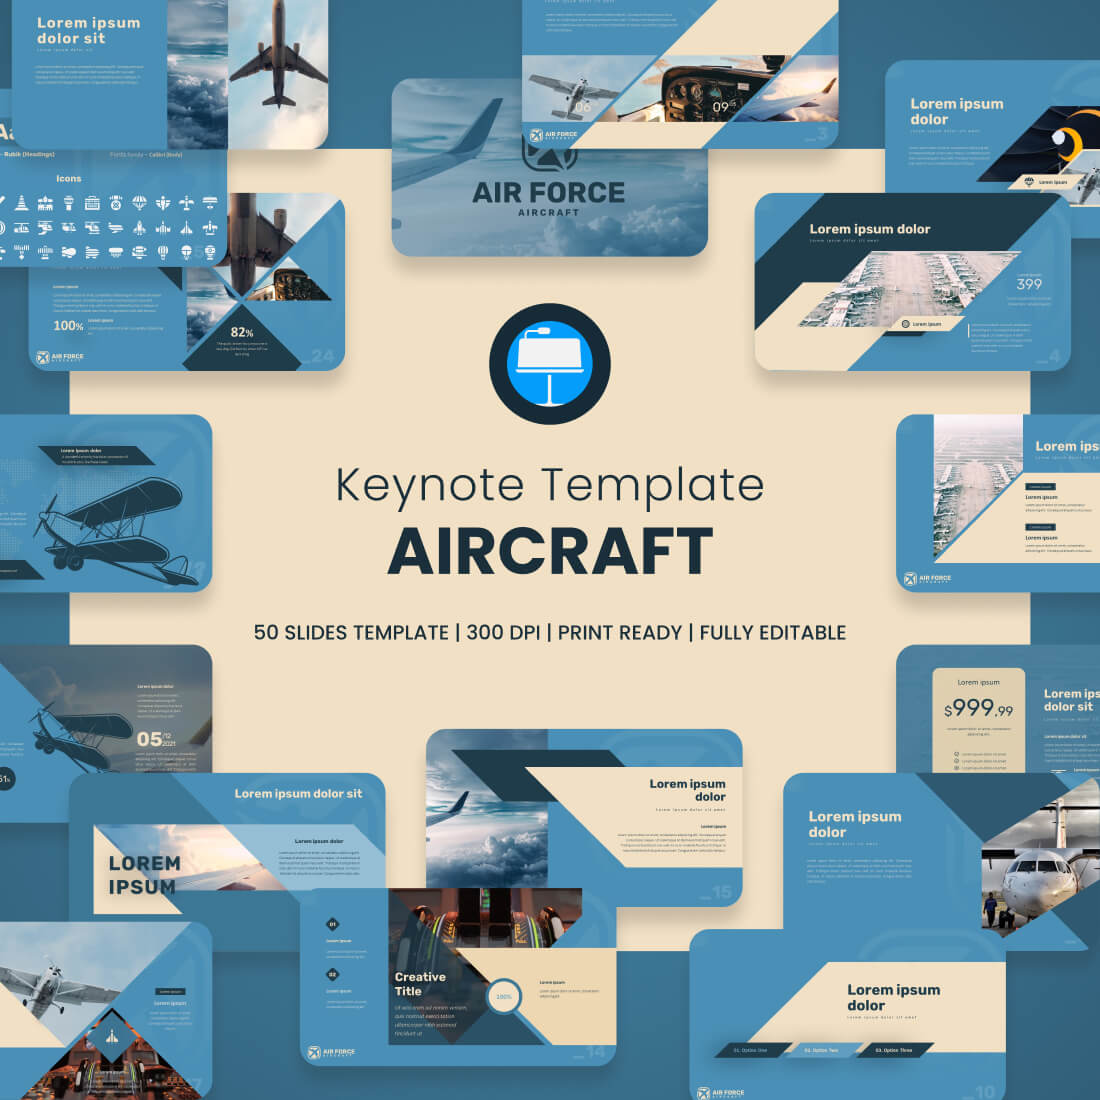 AirForce Military Keynote Template cover image.